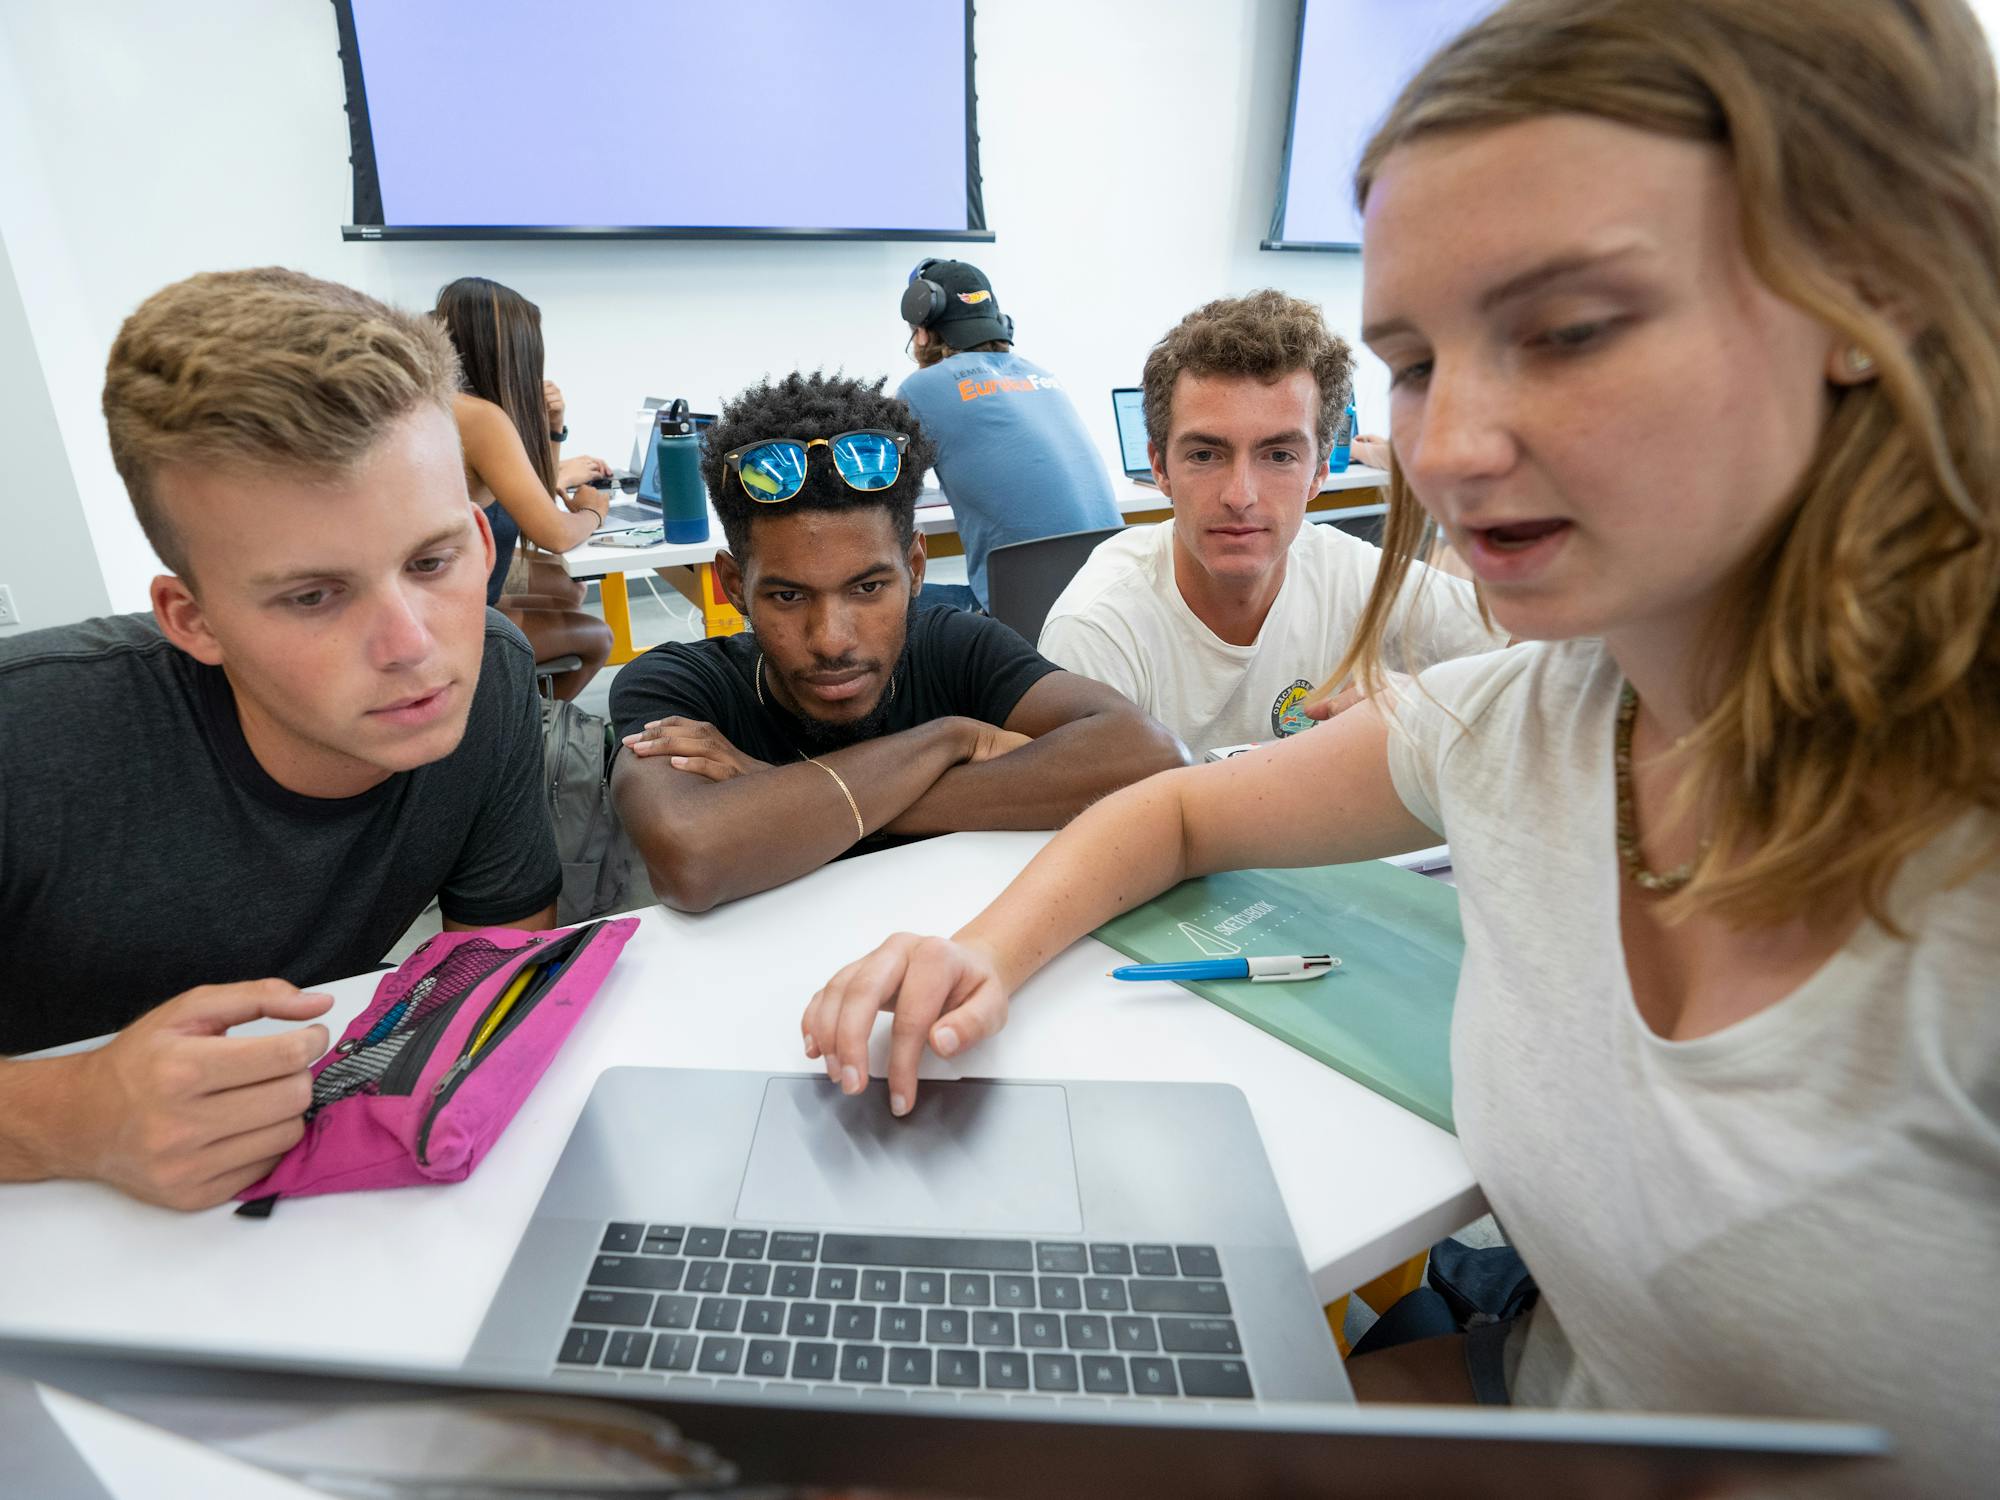 Group of students looking at laptop